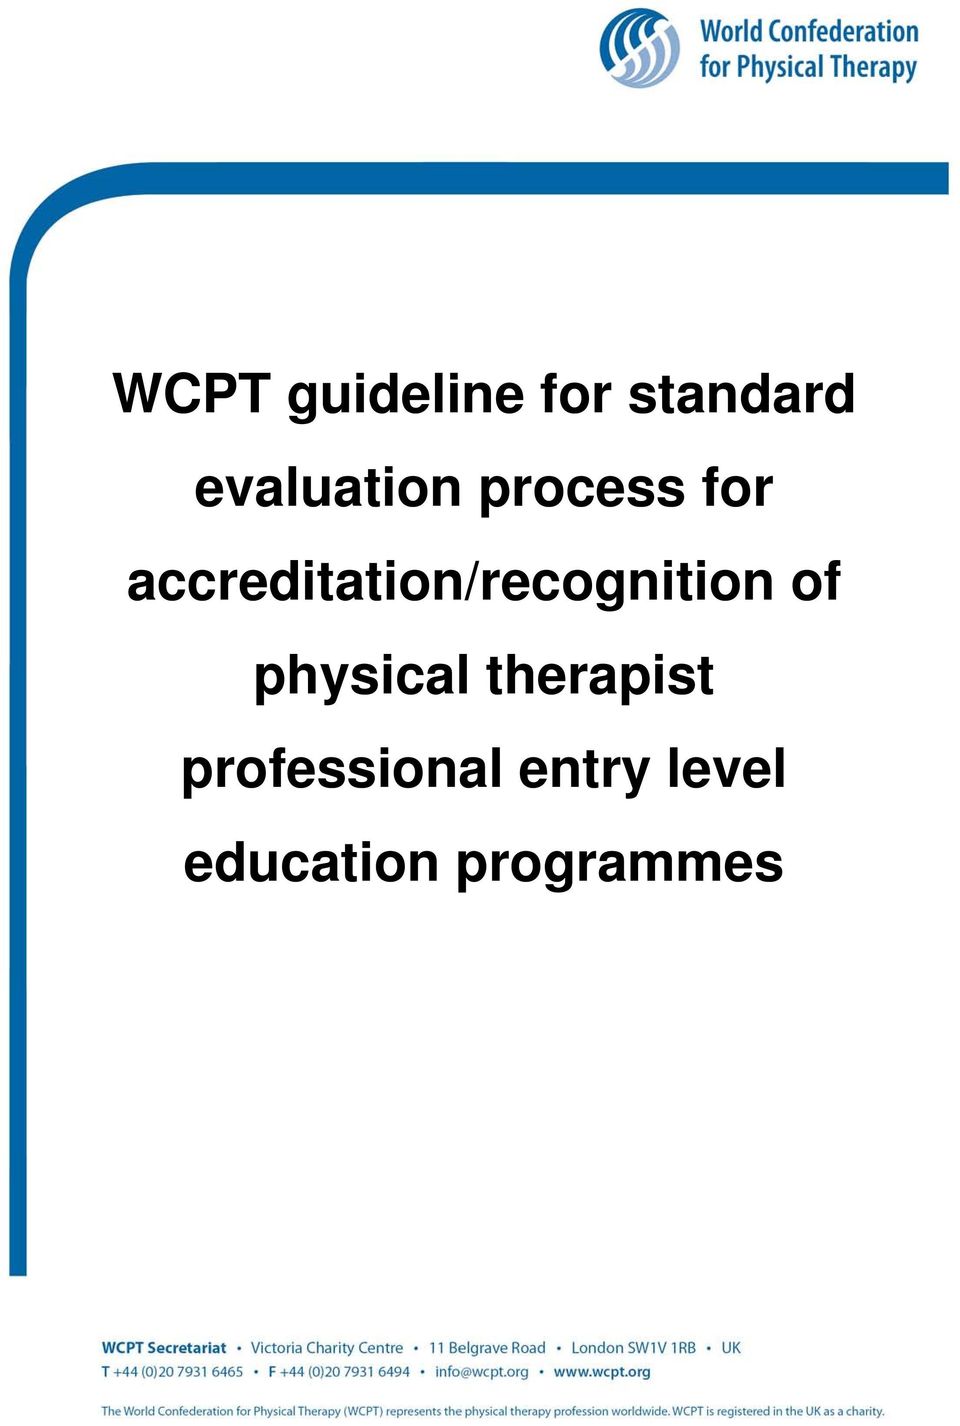 accreditation/recognition of